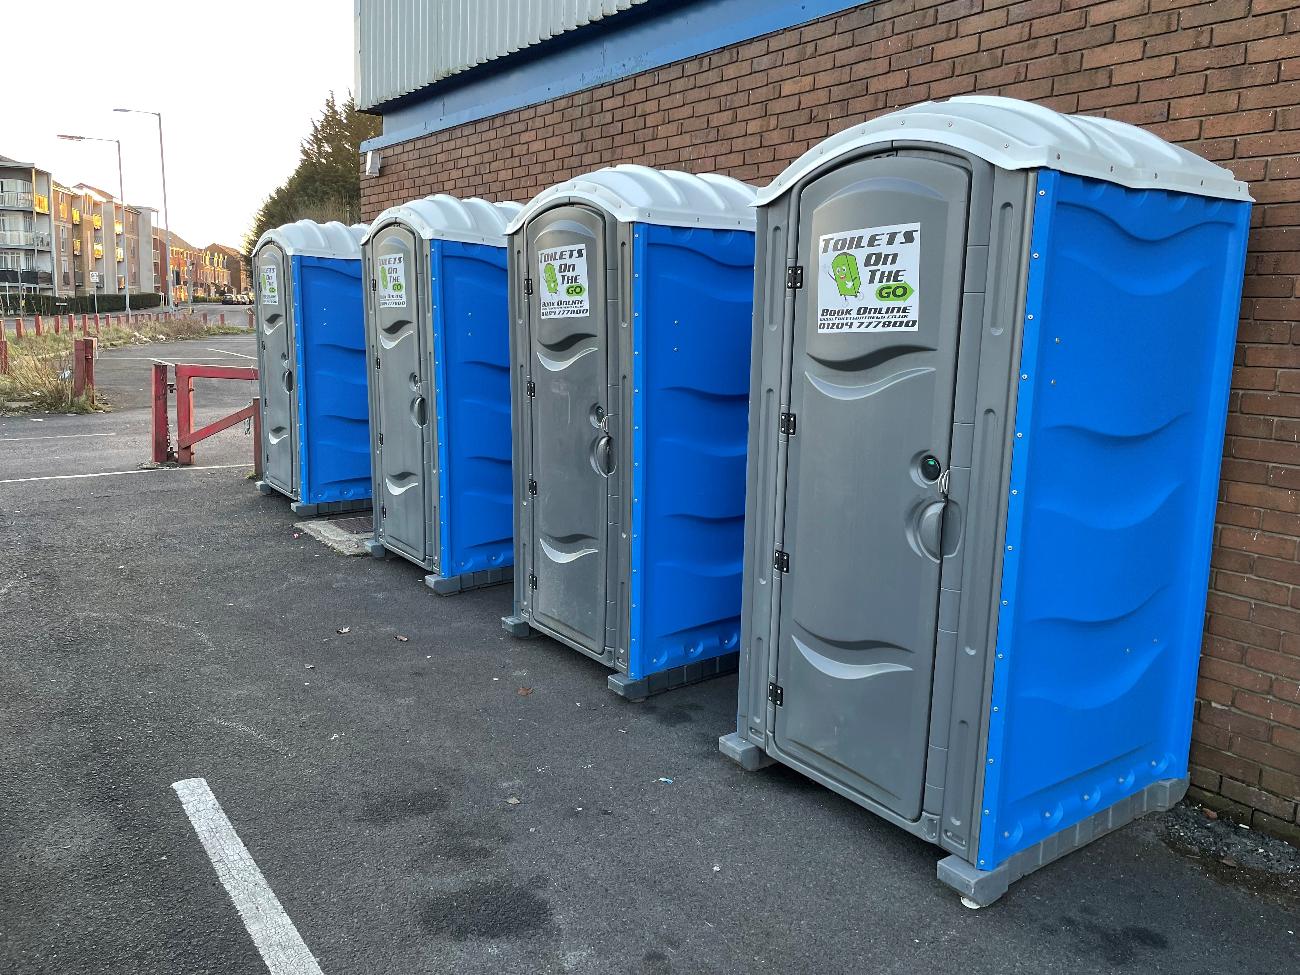 Gallery | Portable Toilet Loo Hire Rental Company in North West uk and Manchester gallery image 25